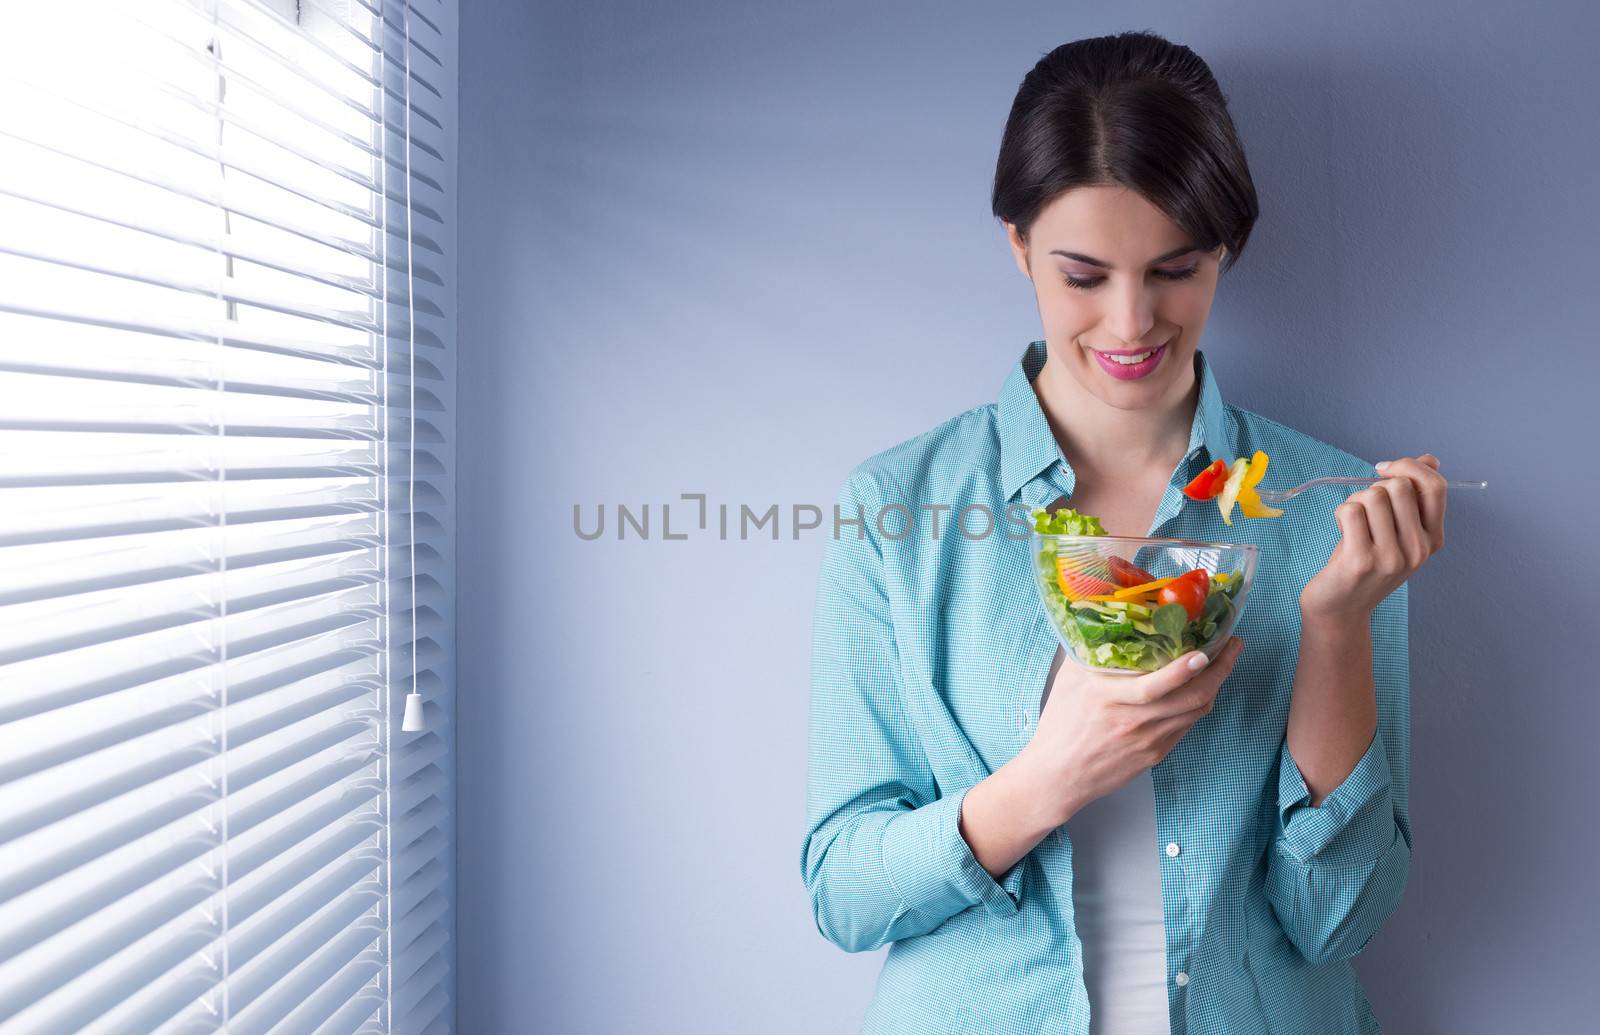 Woman smiling and eating salad in front of a window.